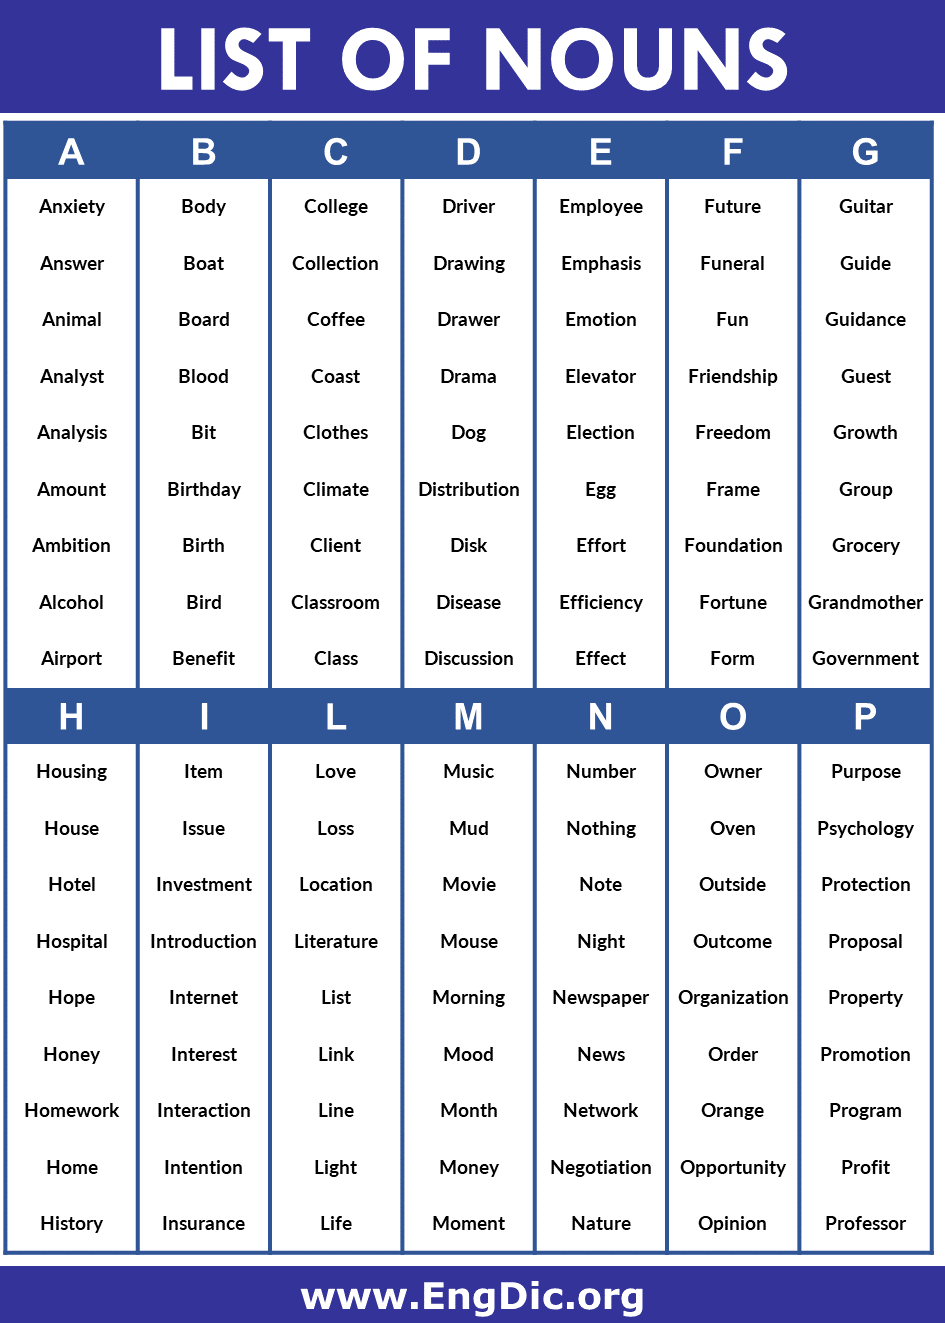 300+ List of Nouns A to Z PDF and Infographics - EngDic